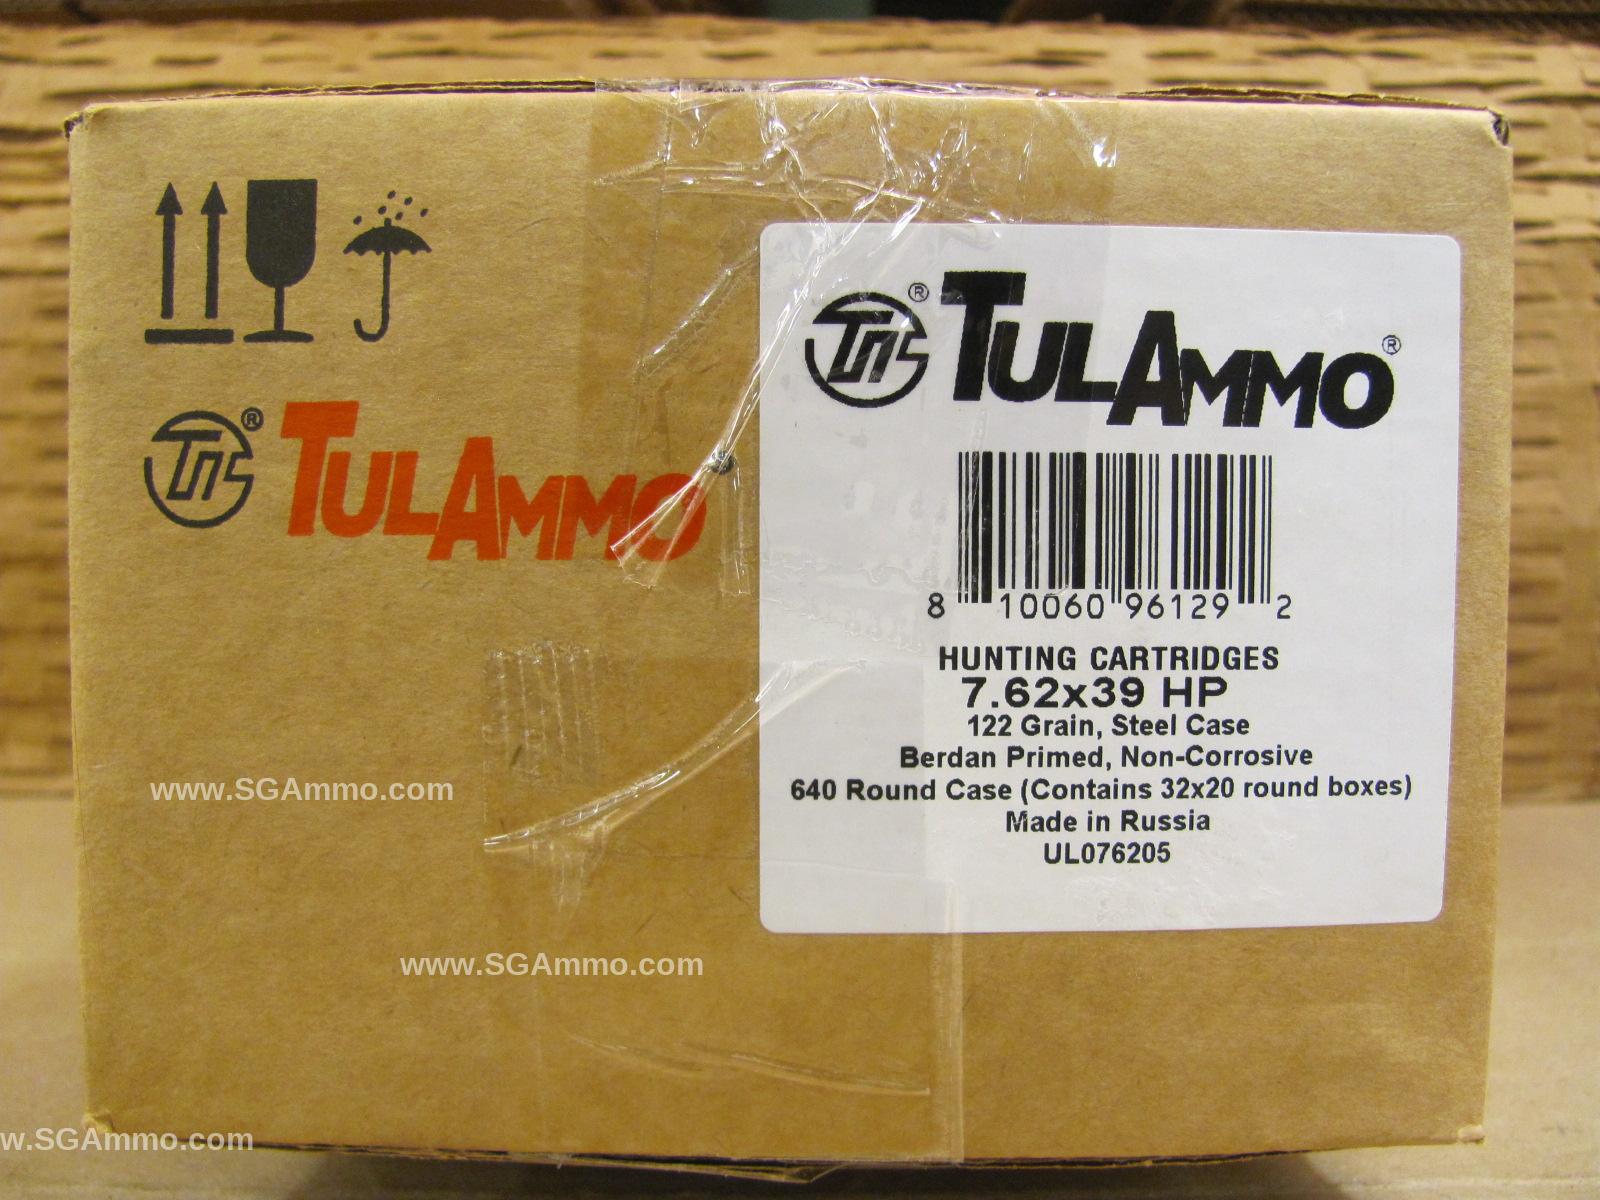 640 Round Sealed Can - 7.62x39 122 Grain Hollow Point Tula Ammo - UL076205